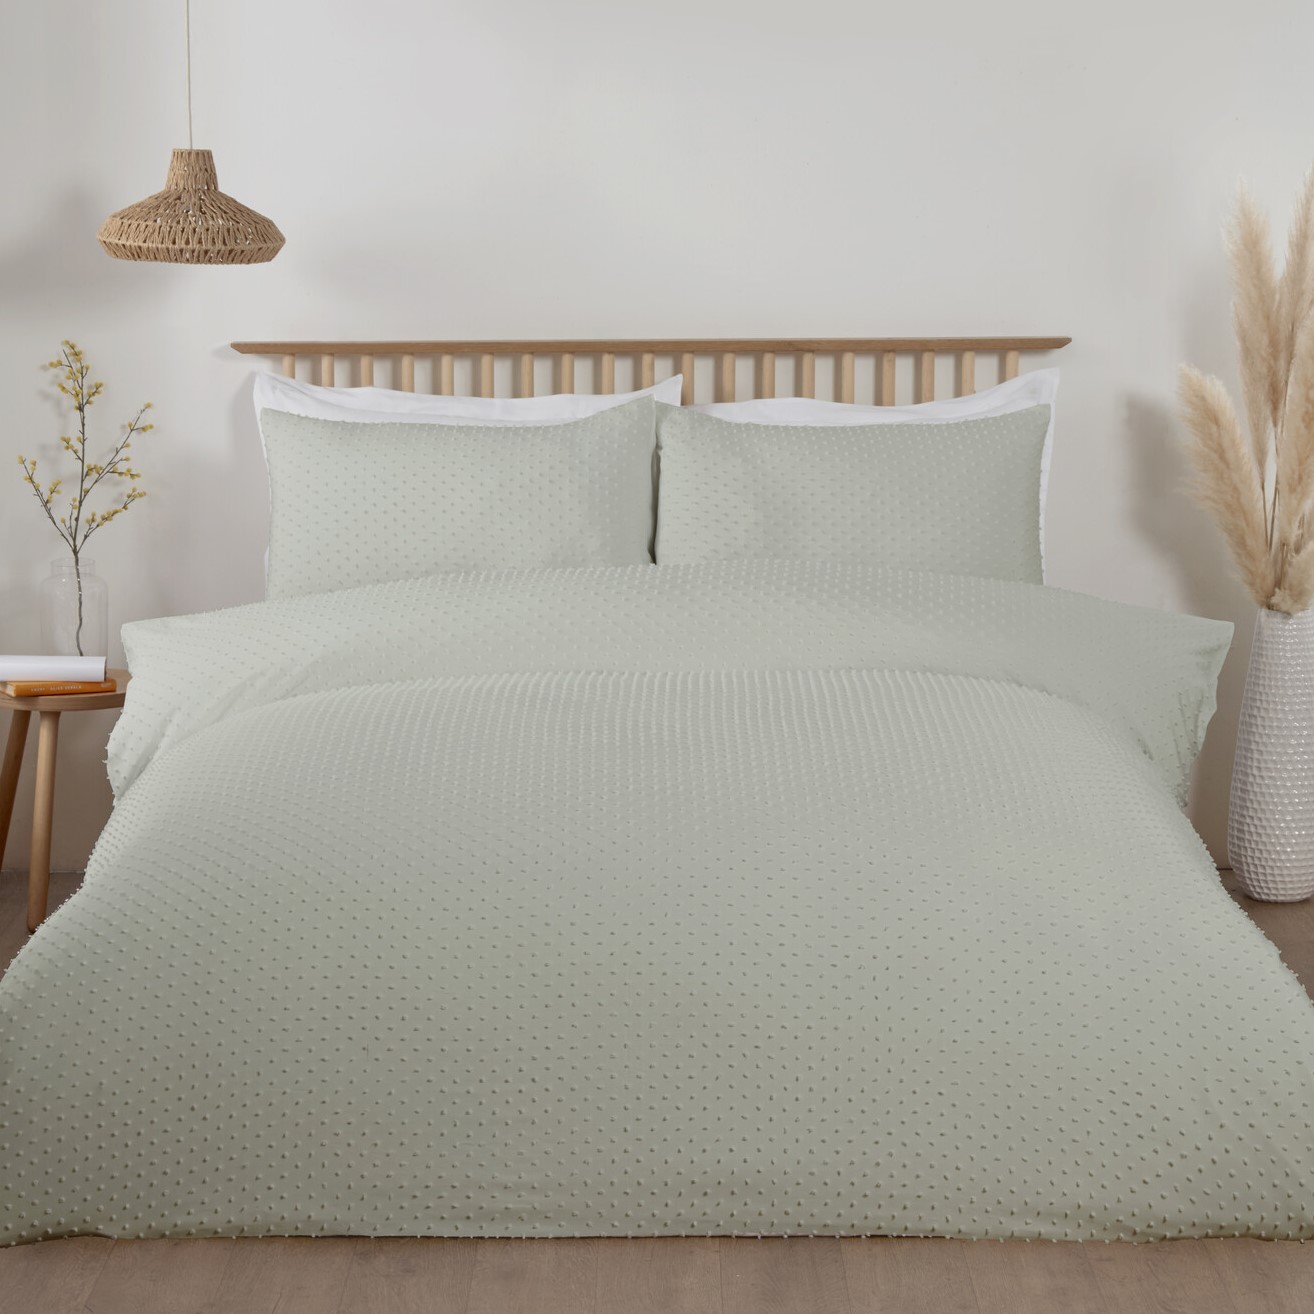 Sienna Tufted Dot Duvet Cover and Pillowcase Set - Sage / Double Image 1